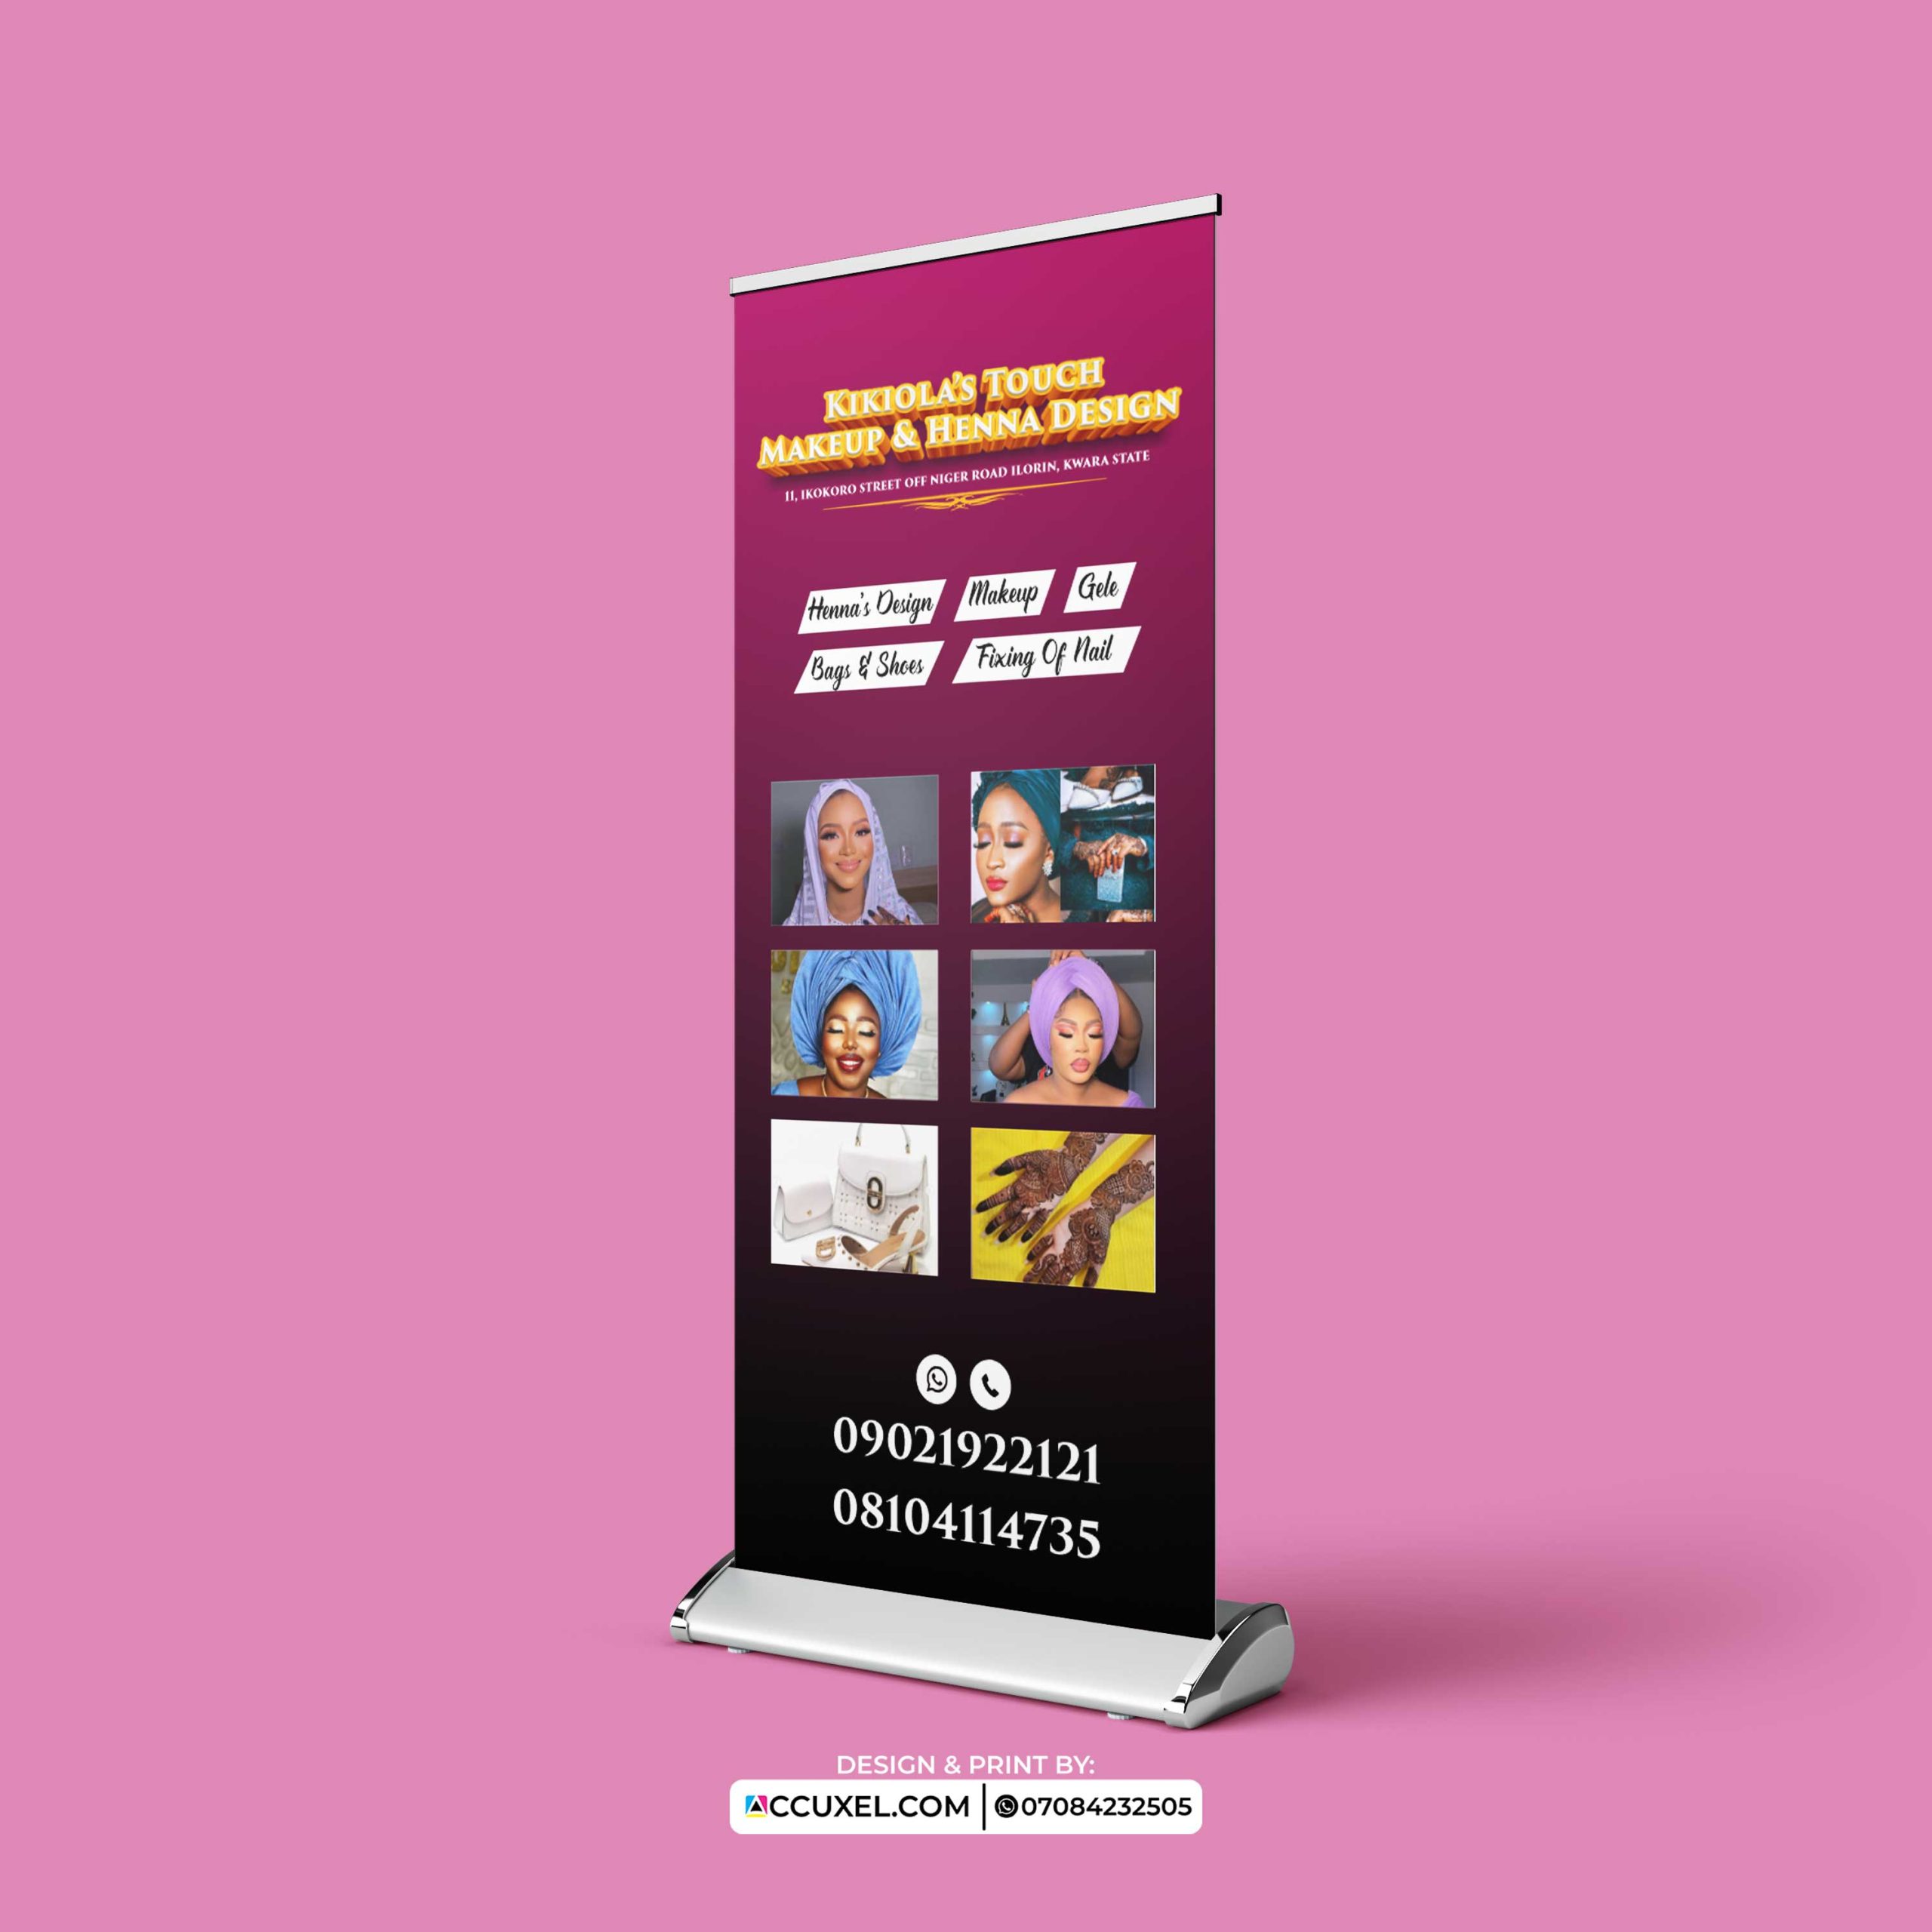 retractable banner for business design and printing